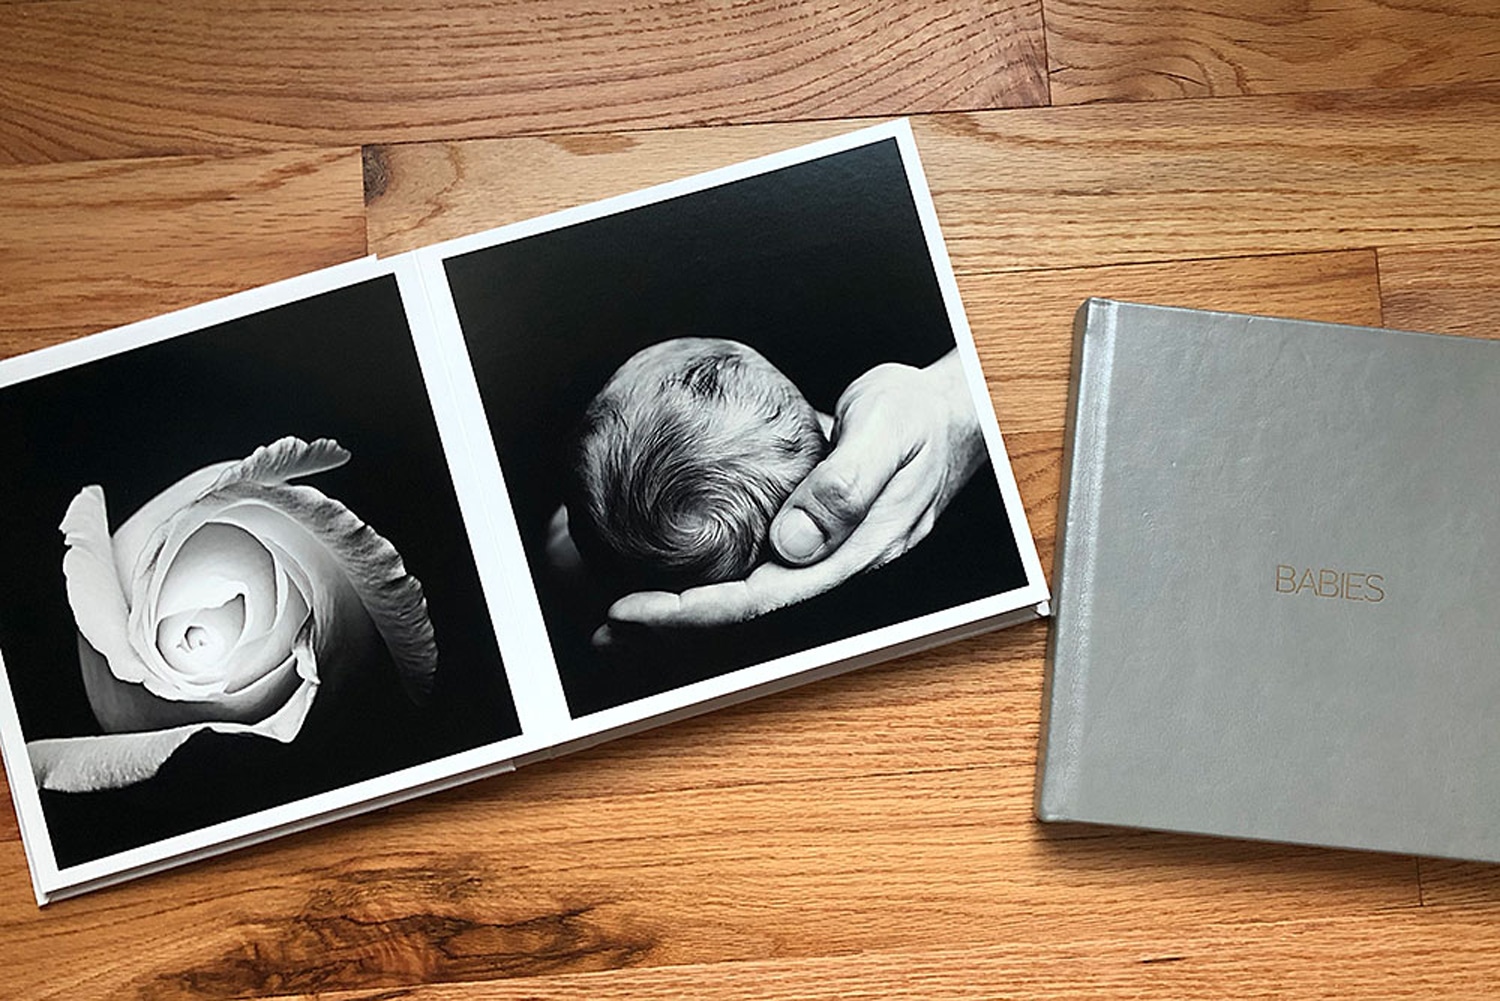 A baby book with a photo of a baby and a rose.